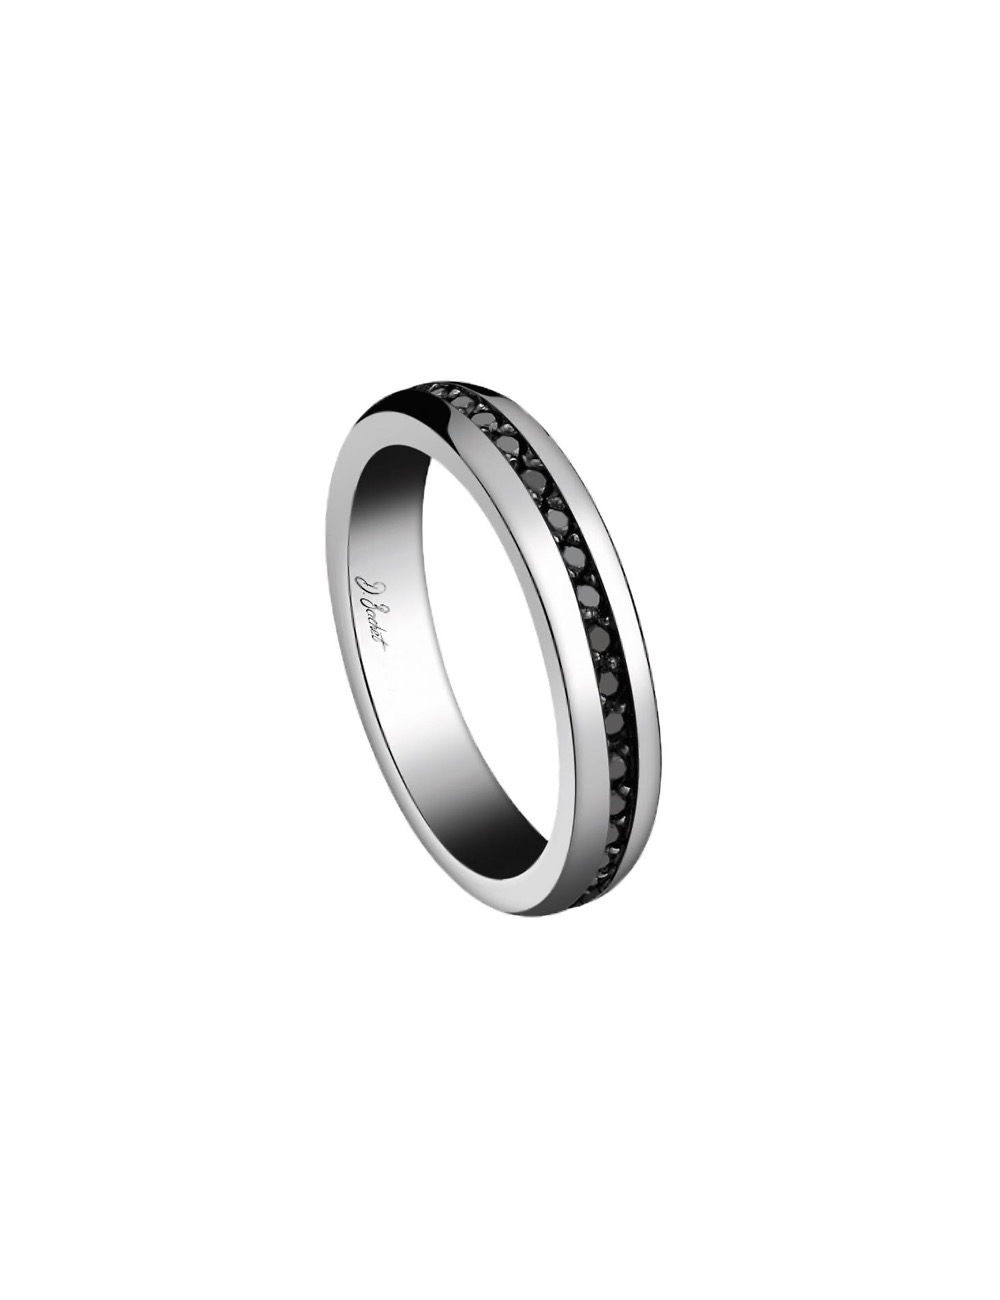 A wedding band for men that is both traditional and modern with the line of black diamonds